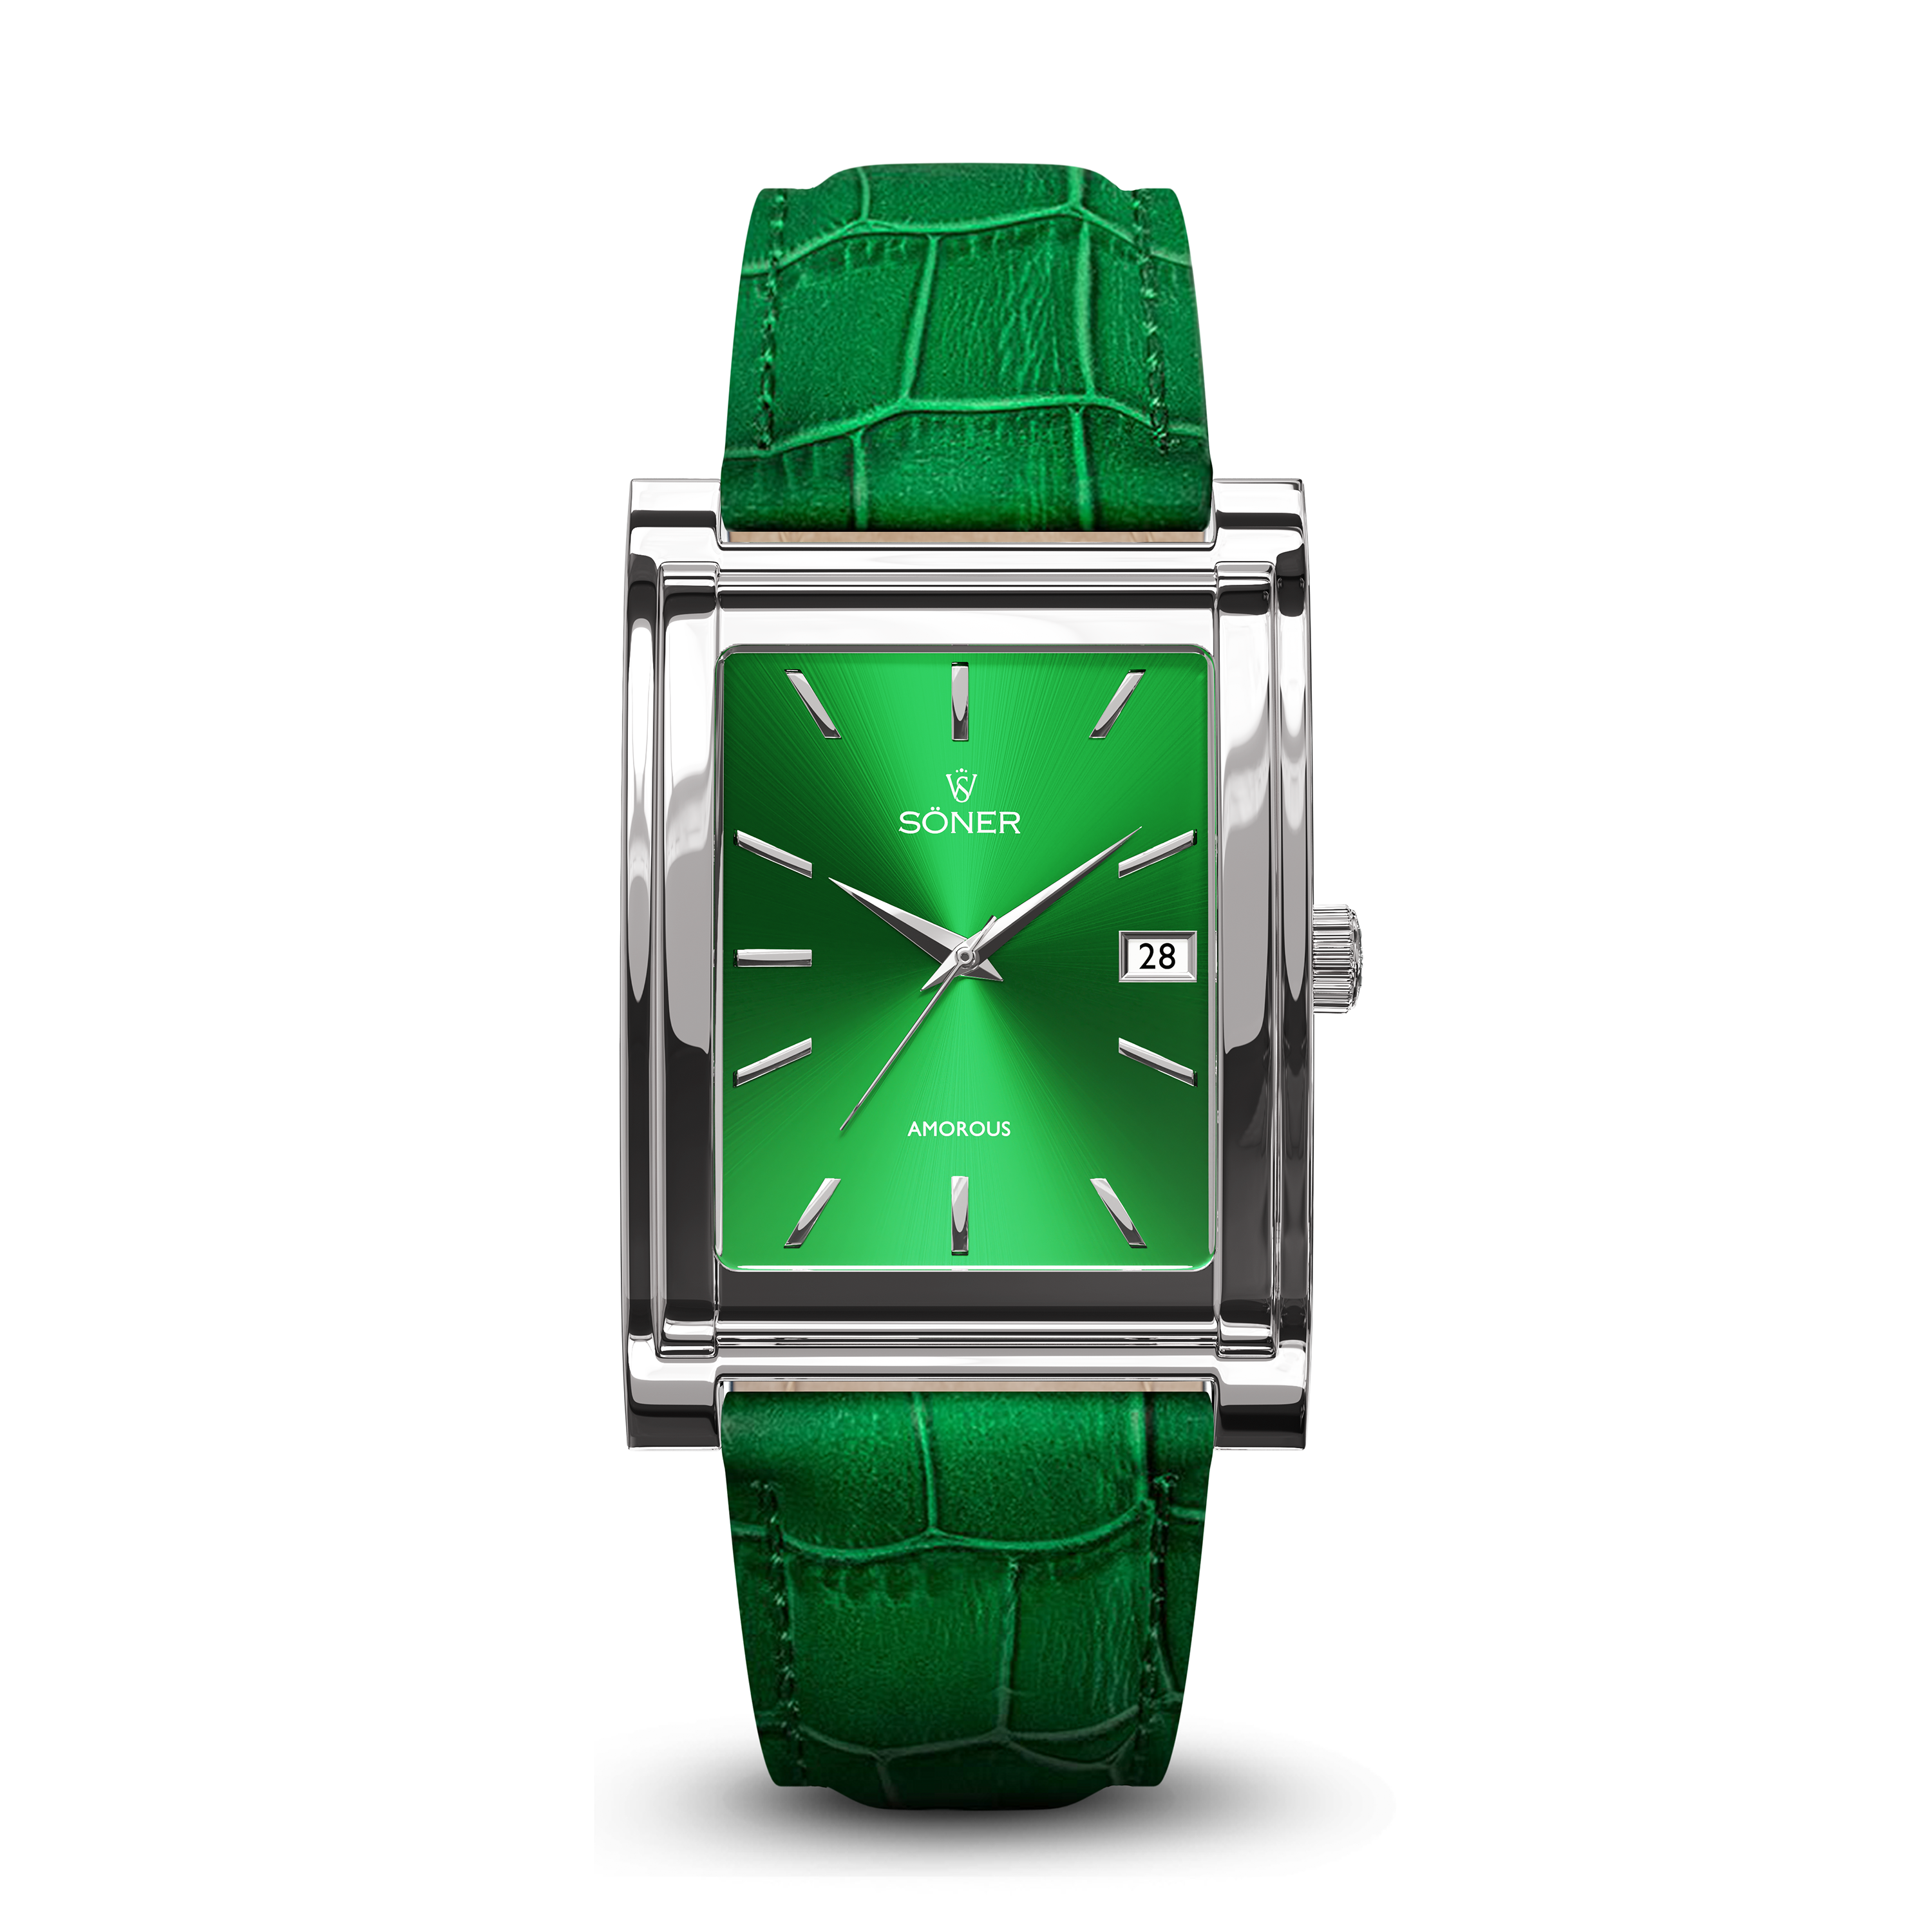 Square automatic watch, Amorous Tokyo with green dial - green alligator pattern leather strap front view